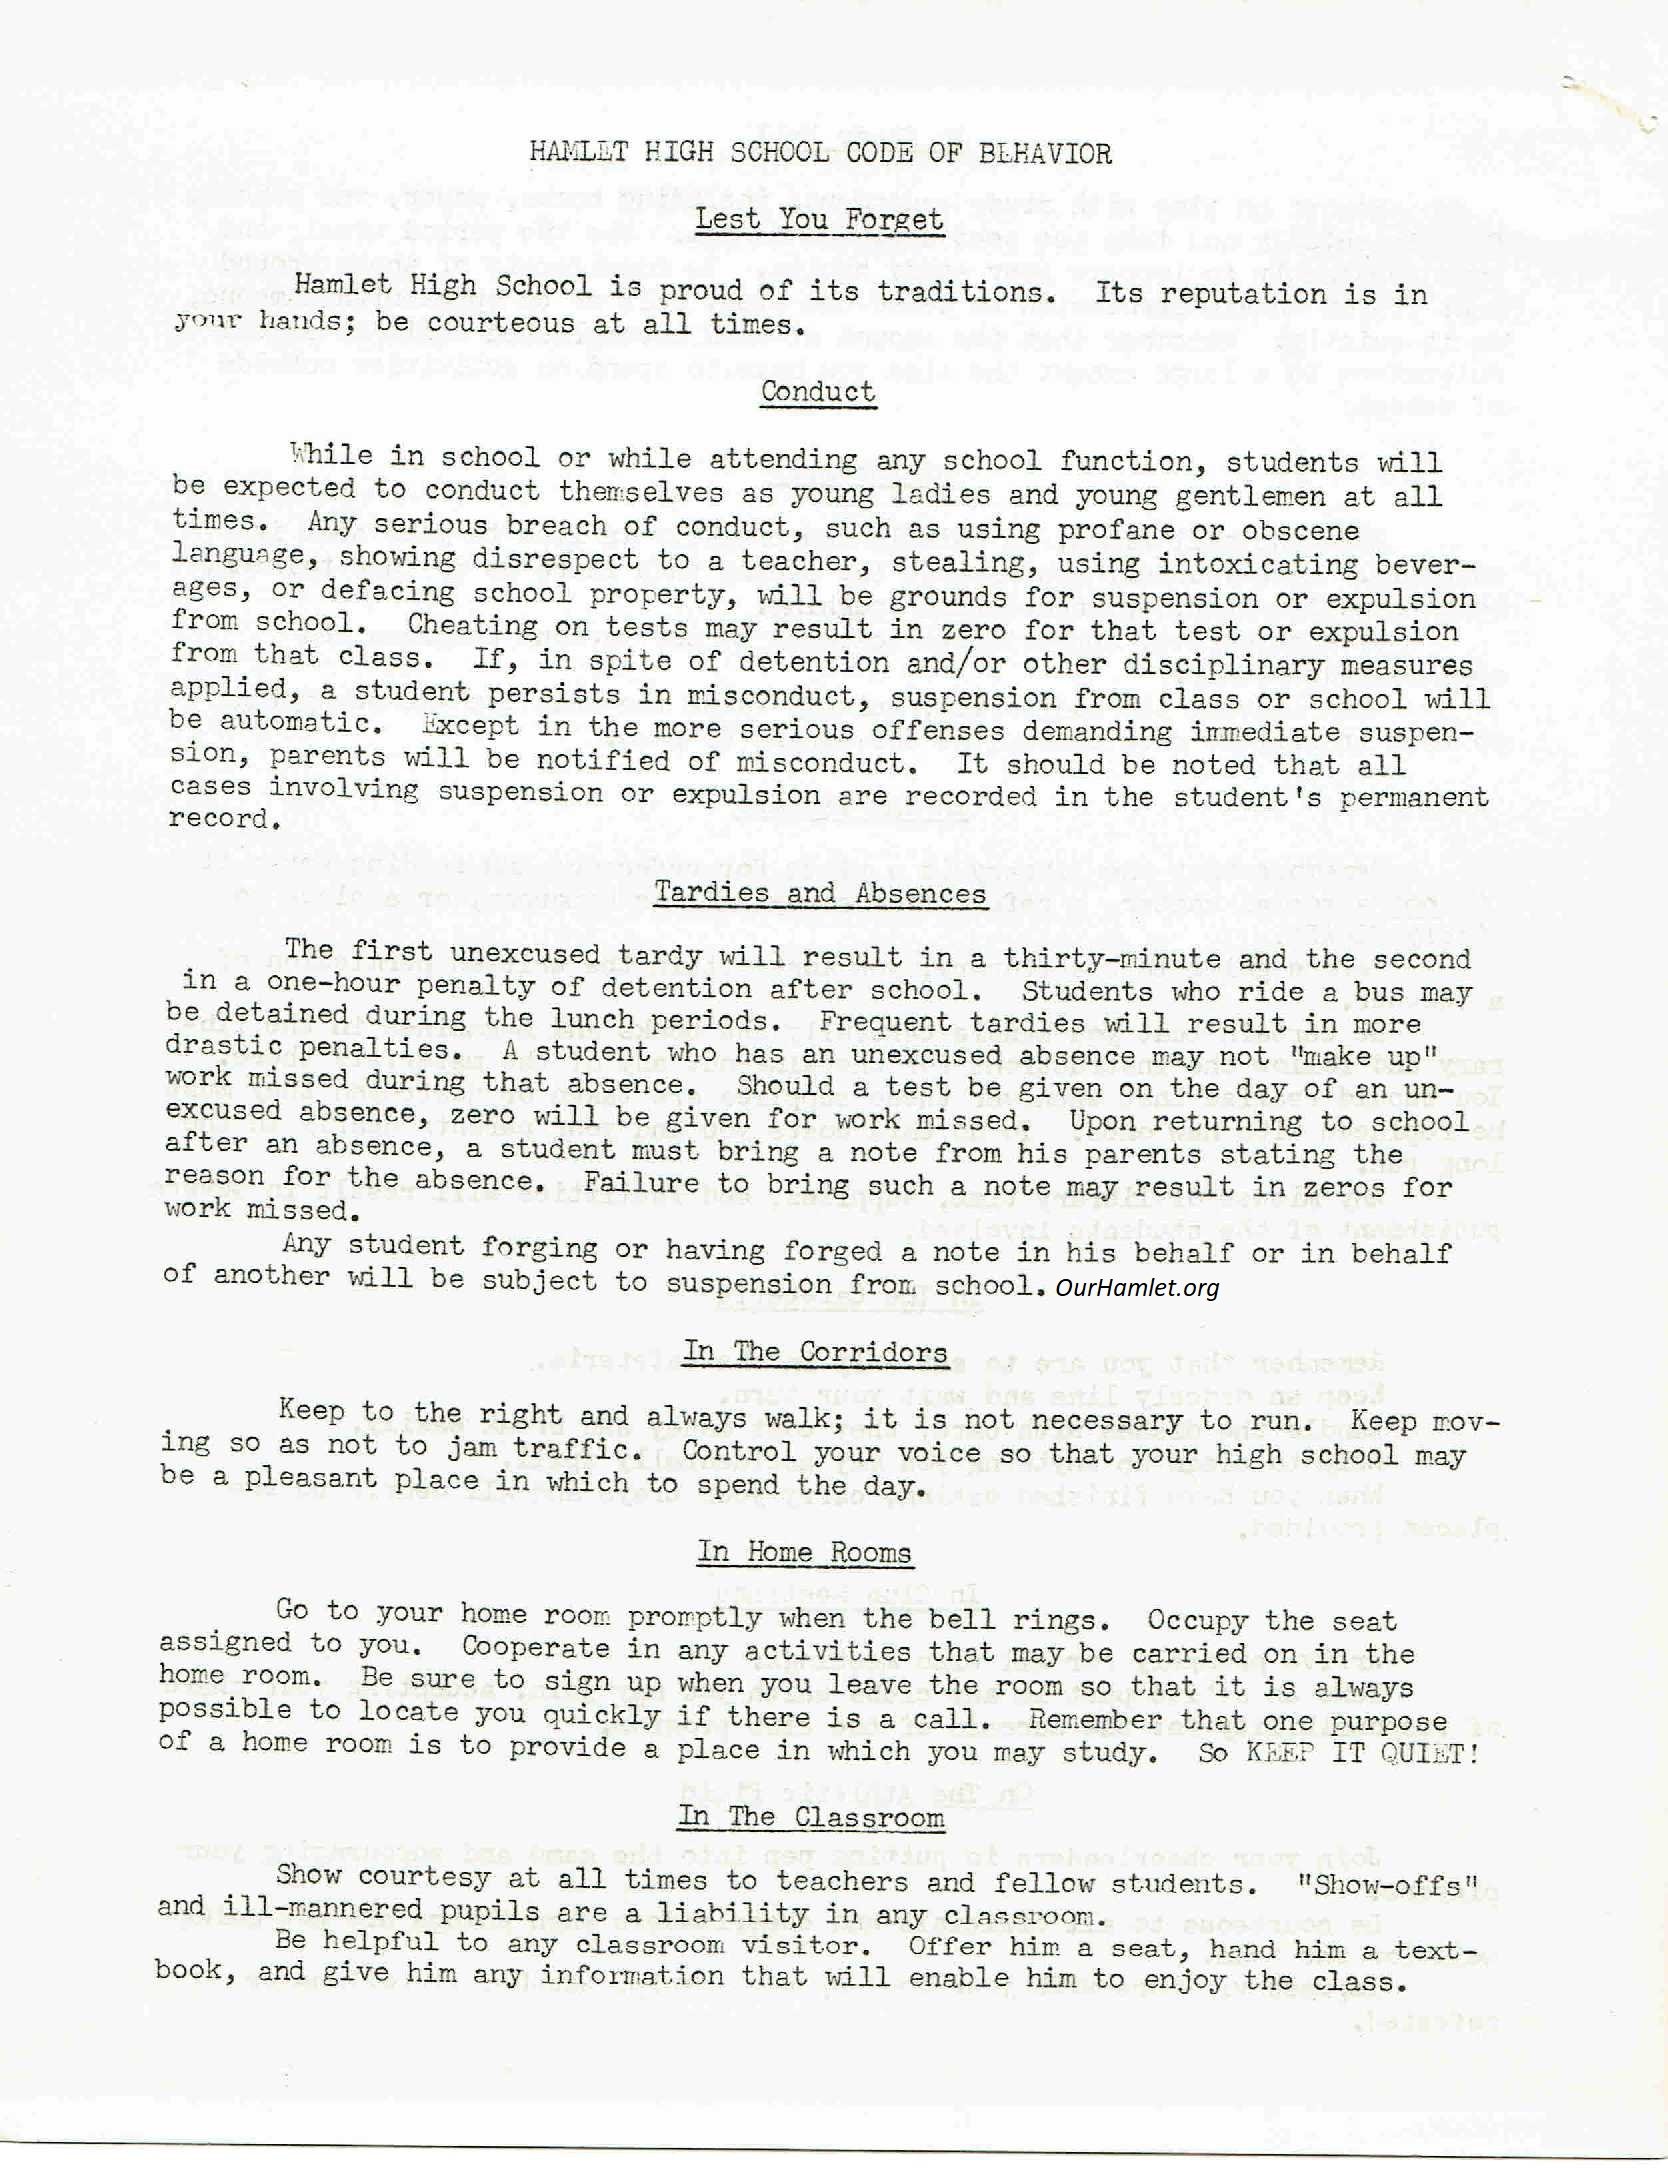 HHS Rules and Procedures 1968_3 OH.jpg